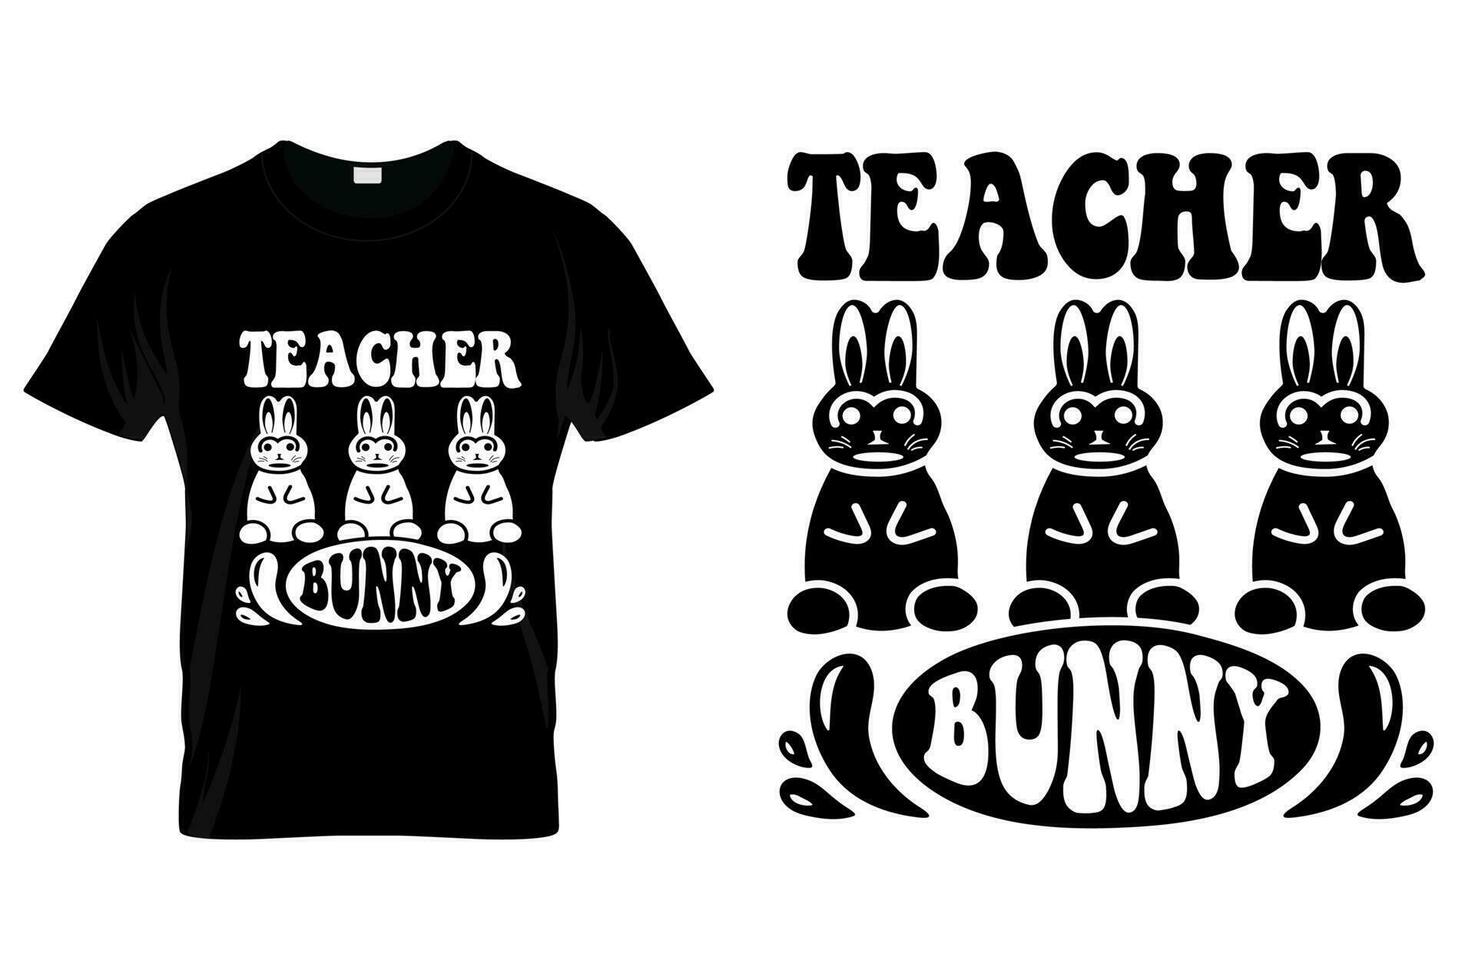 Easter Day Tshirt design Easter Funny Quotes tshirt for kids men women poster and gift vector